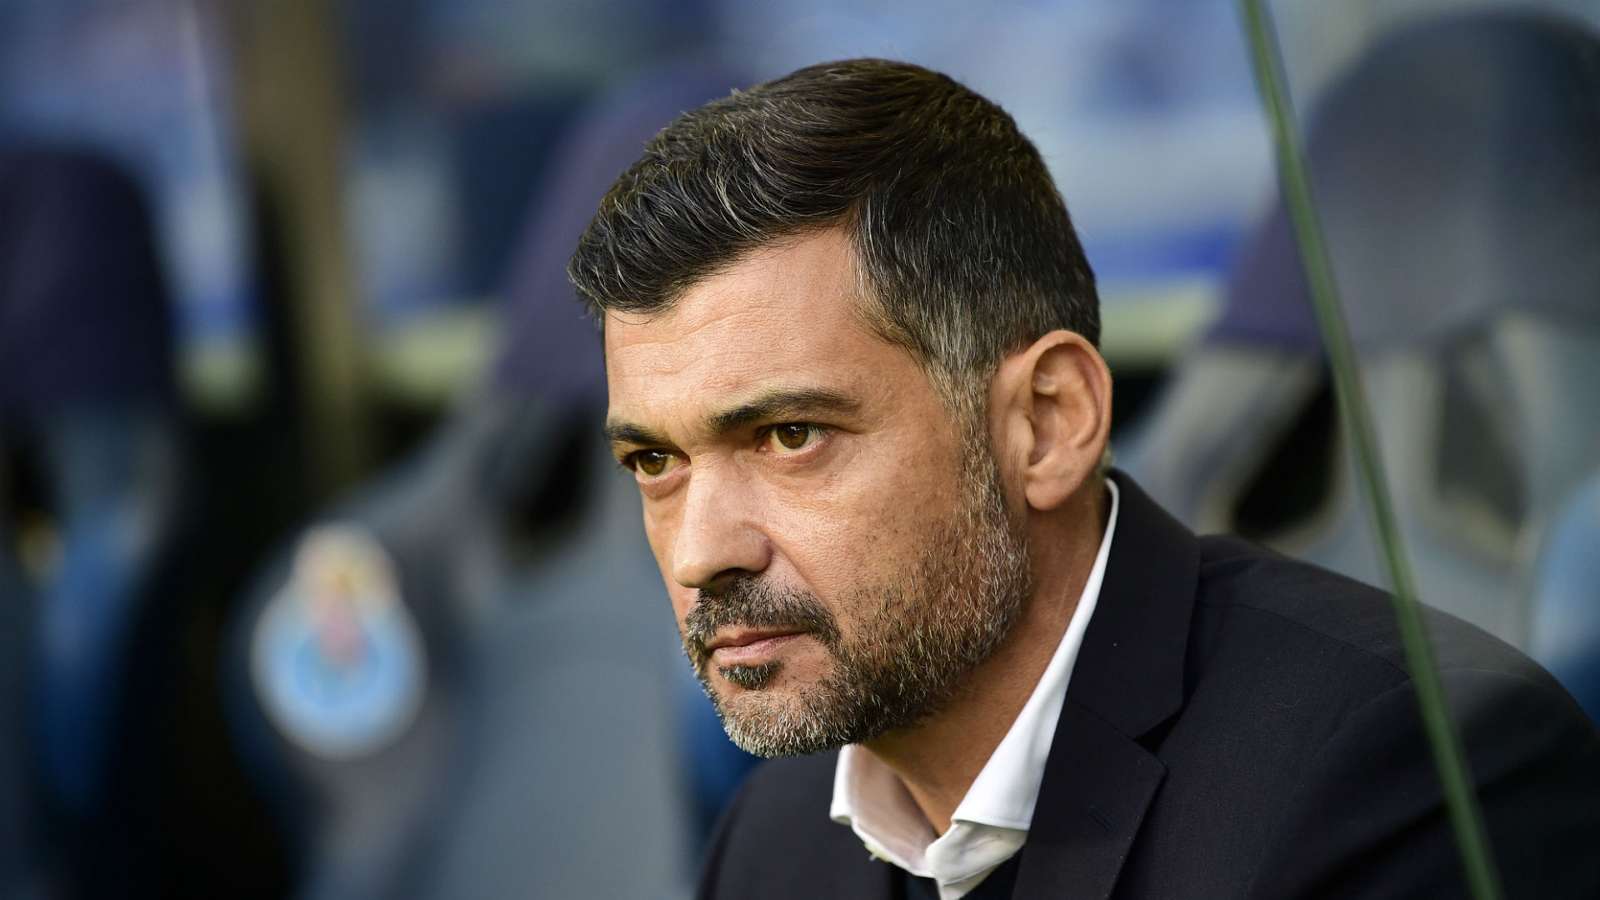 'Football without fans like a salad without dressing' - Porto boss Conceicao on return after coronavirus - Bóng Đá